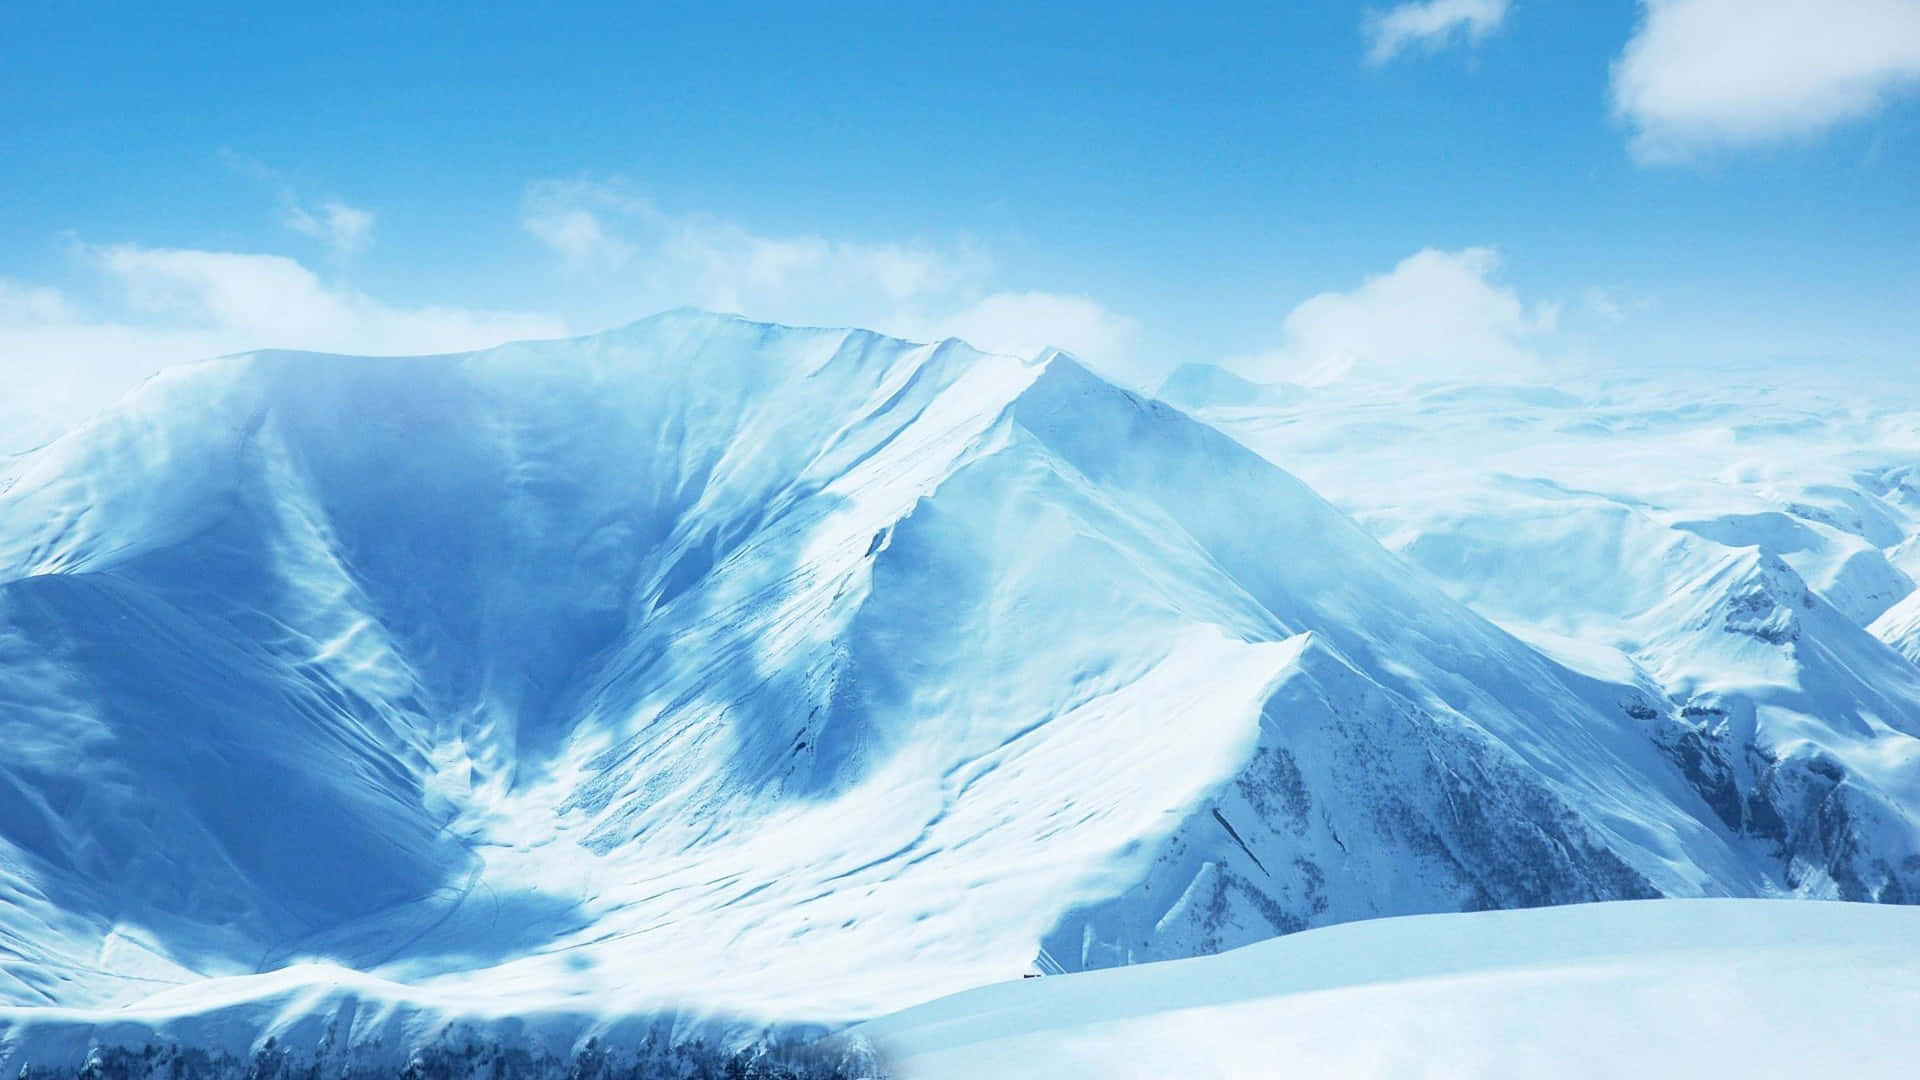 Explore The Majestic Snowy Mountains